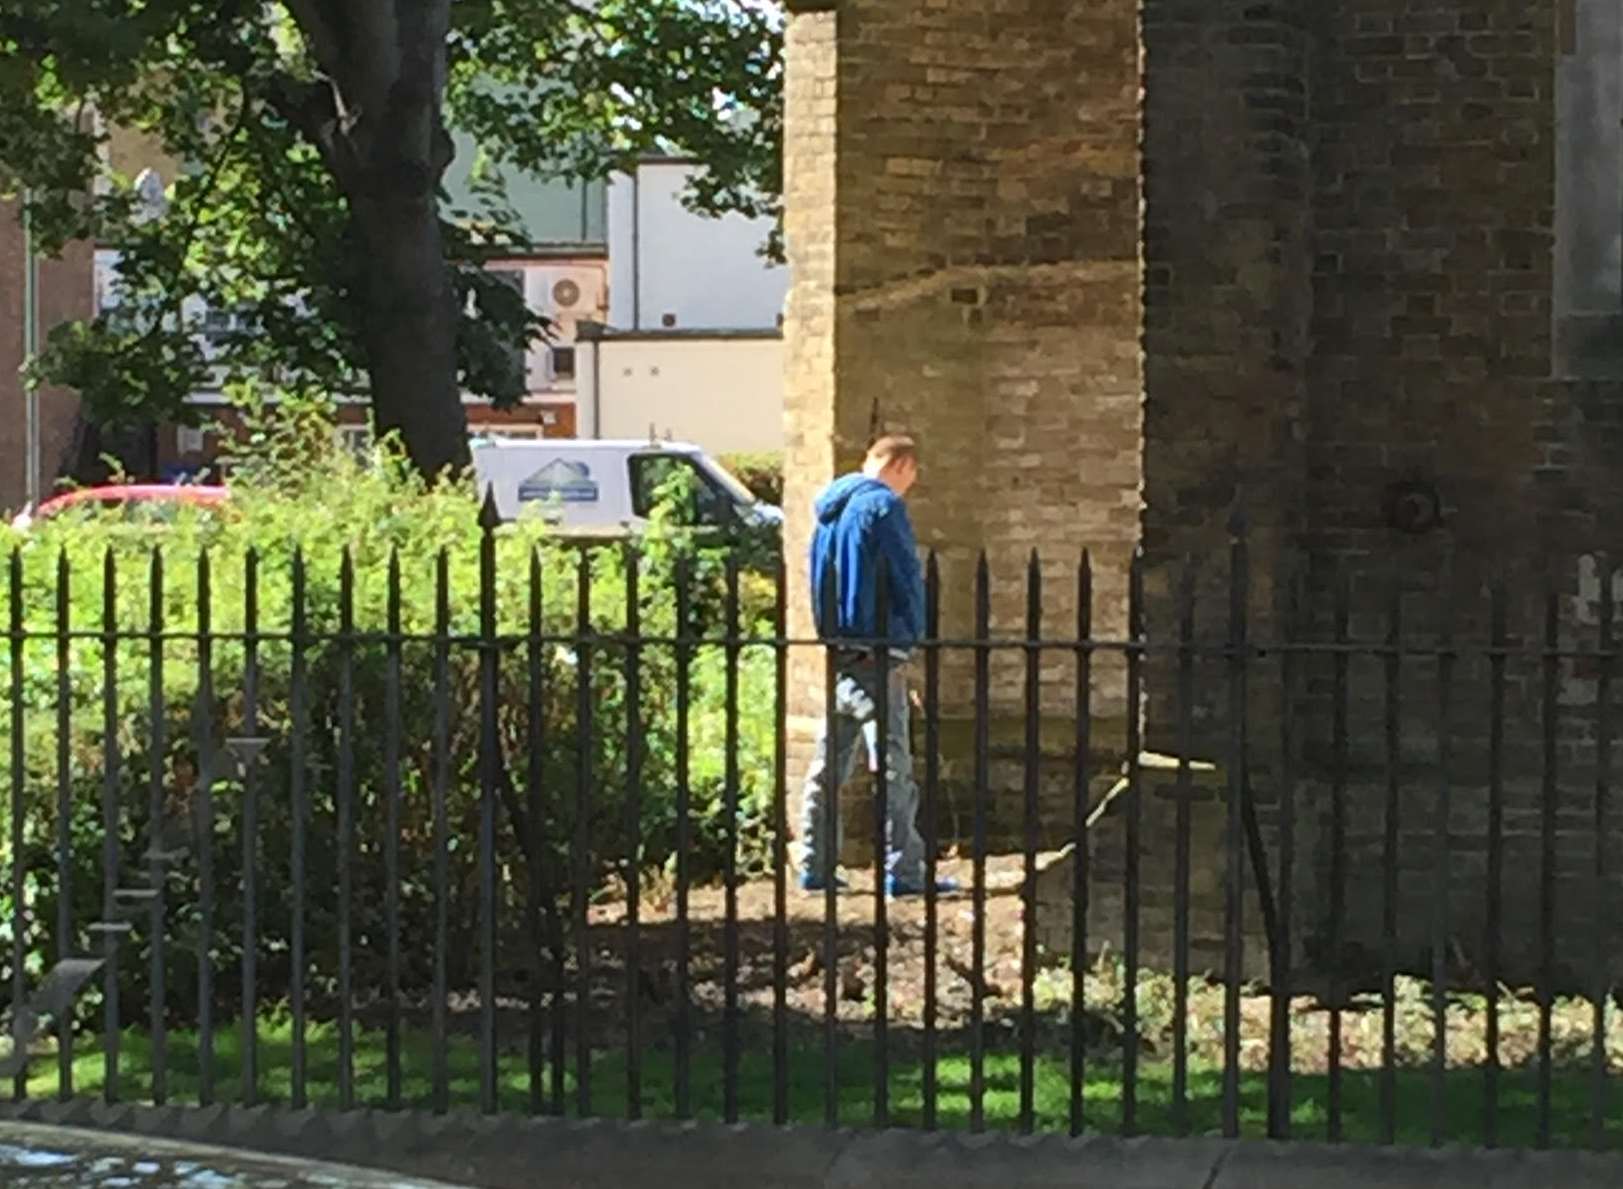 The man is snapped relieving himself against the historic building